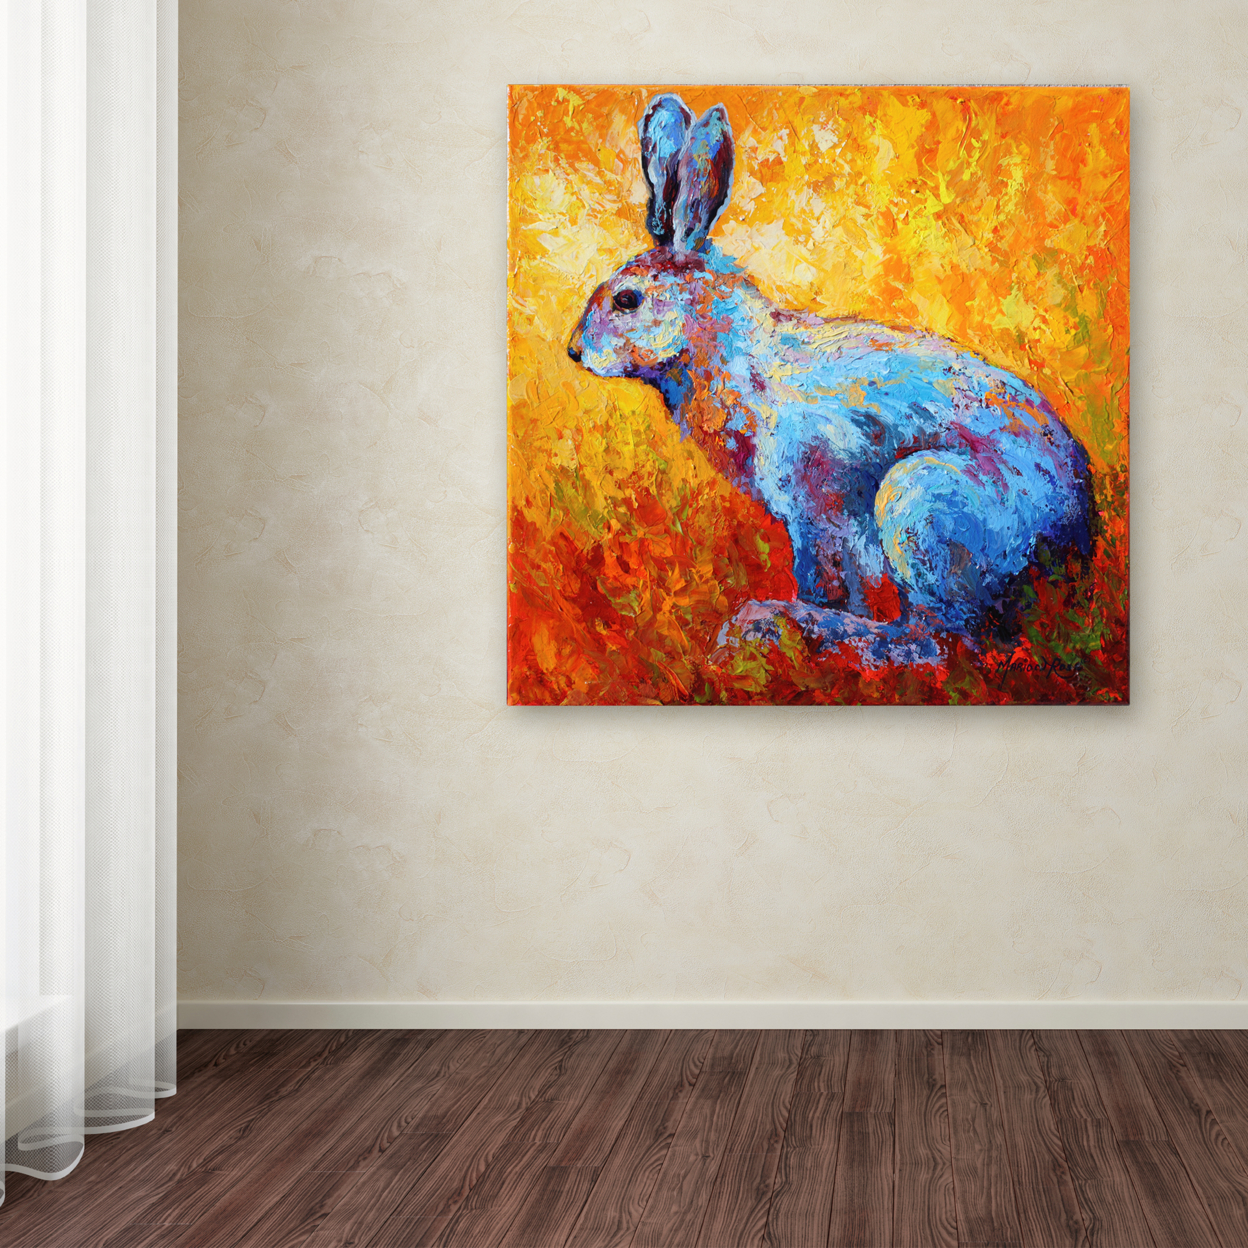 Marion Rose 'Bunnie (krabbit)' Ready To Hang Canvas Art 18 X 18 Inches Made In USA